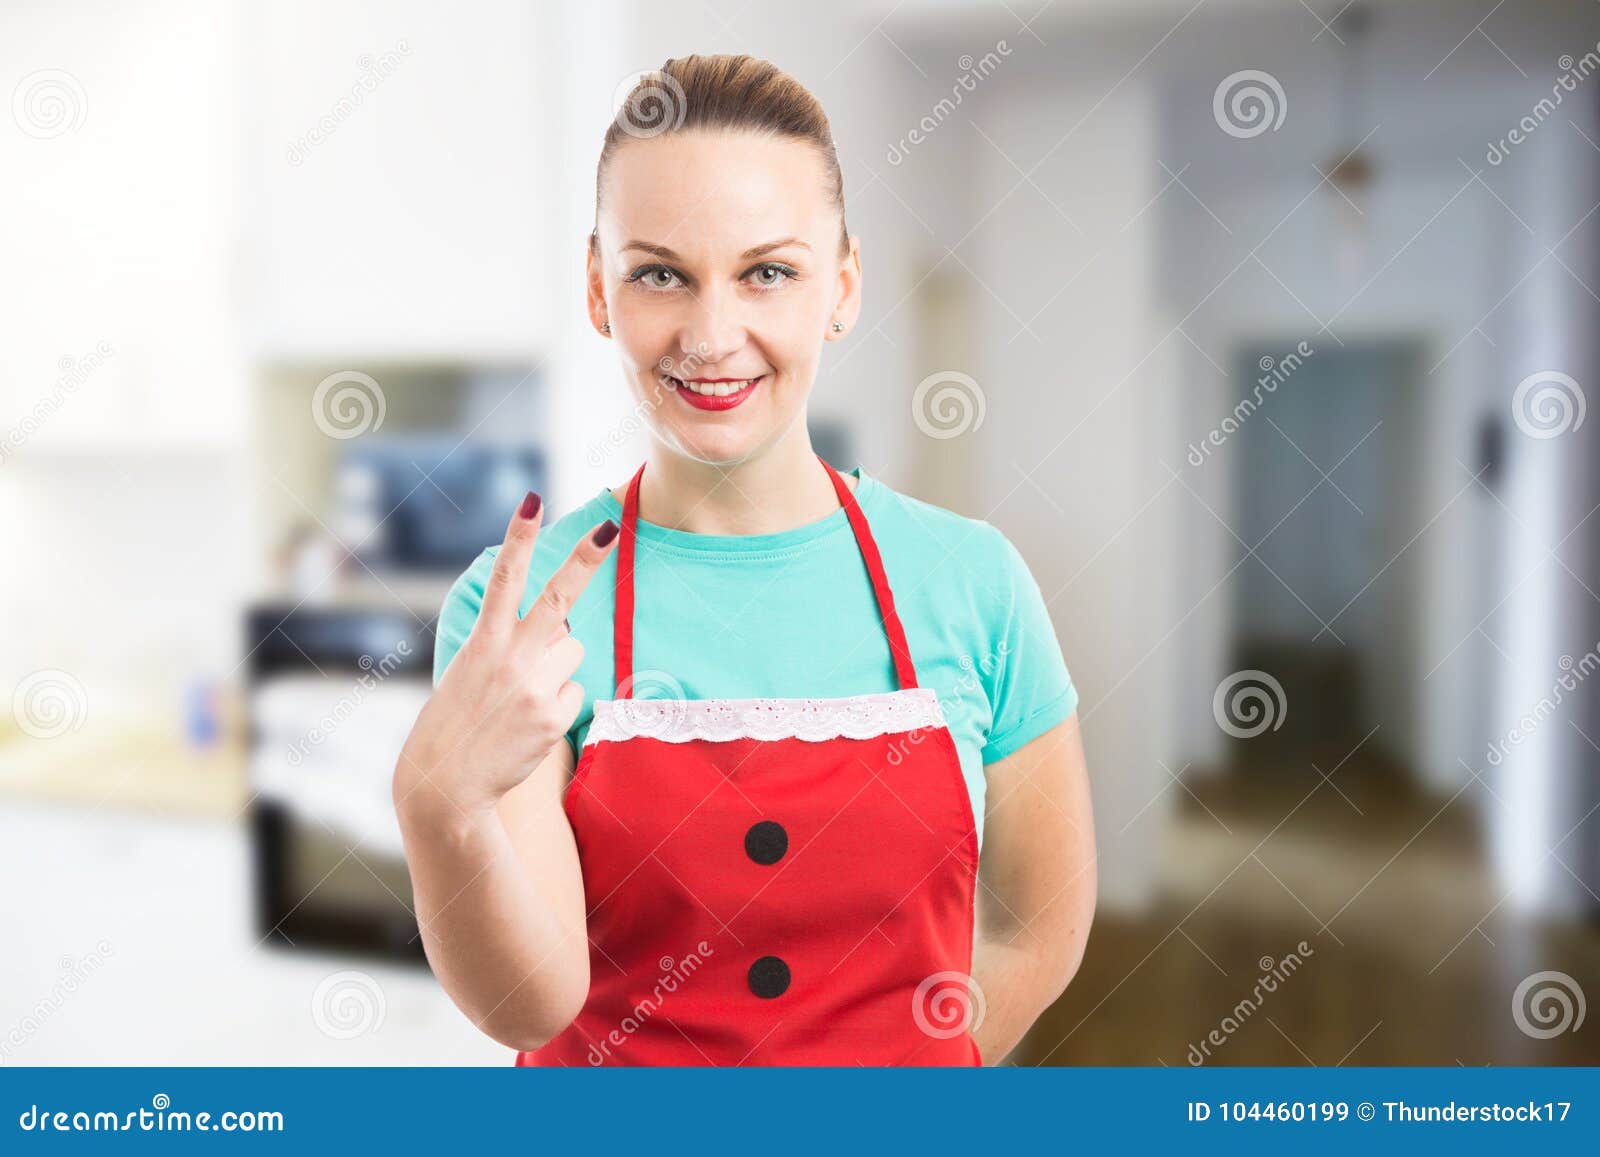 Housekeeper Or Maid Showing Number Two With Fingers Stock Image Image Of House Apron 104460199